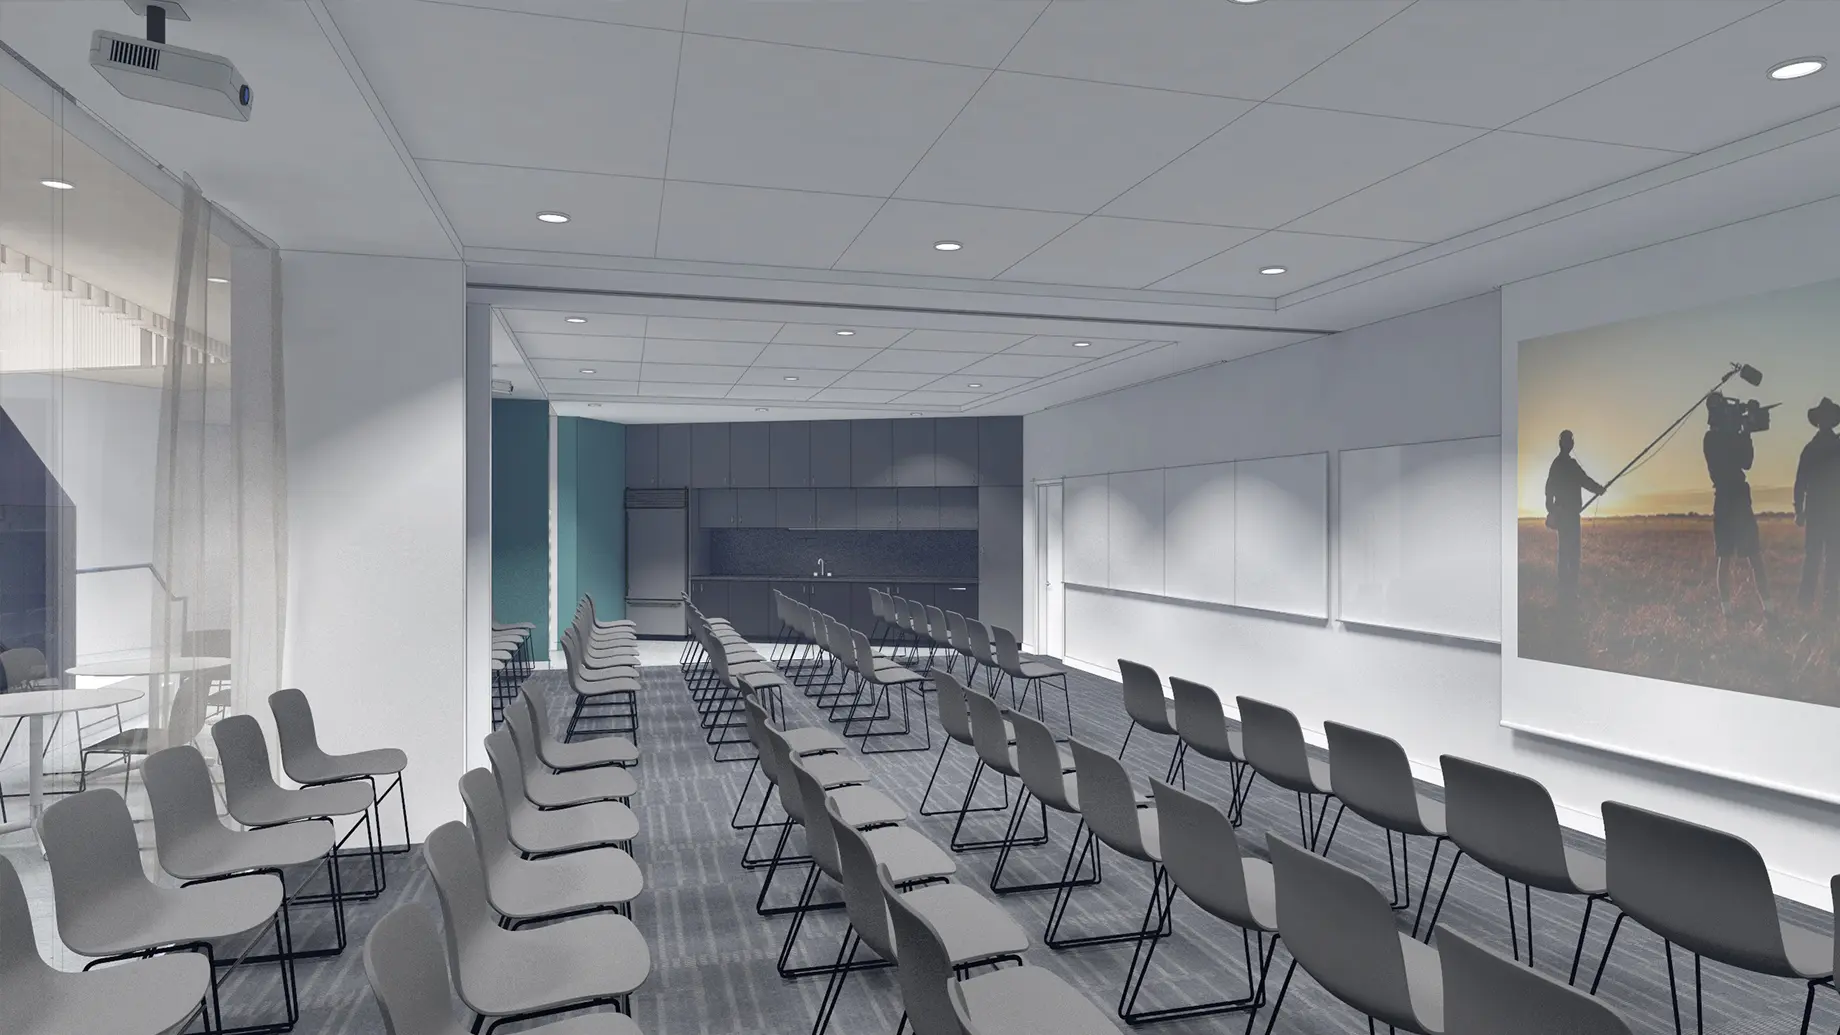 Artist rendering of classroom with charis arranged in rows